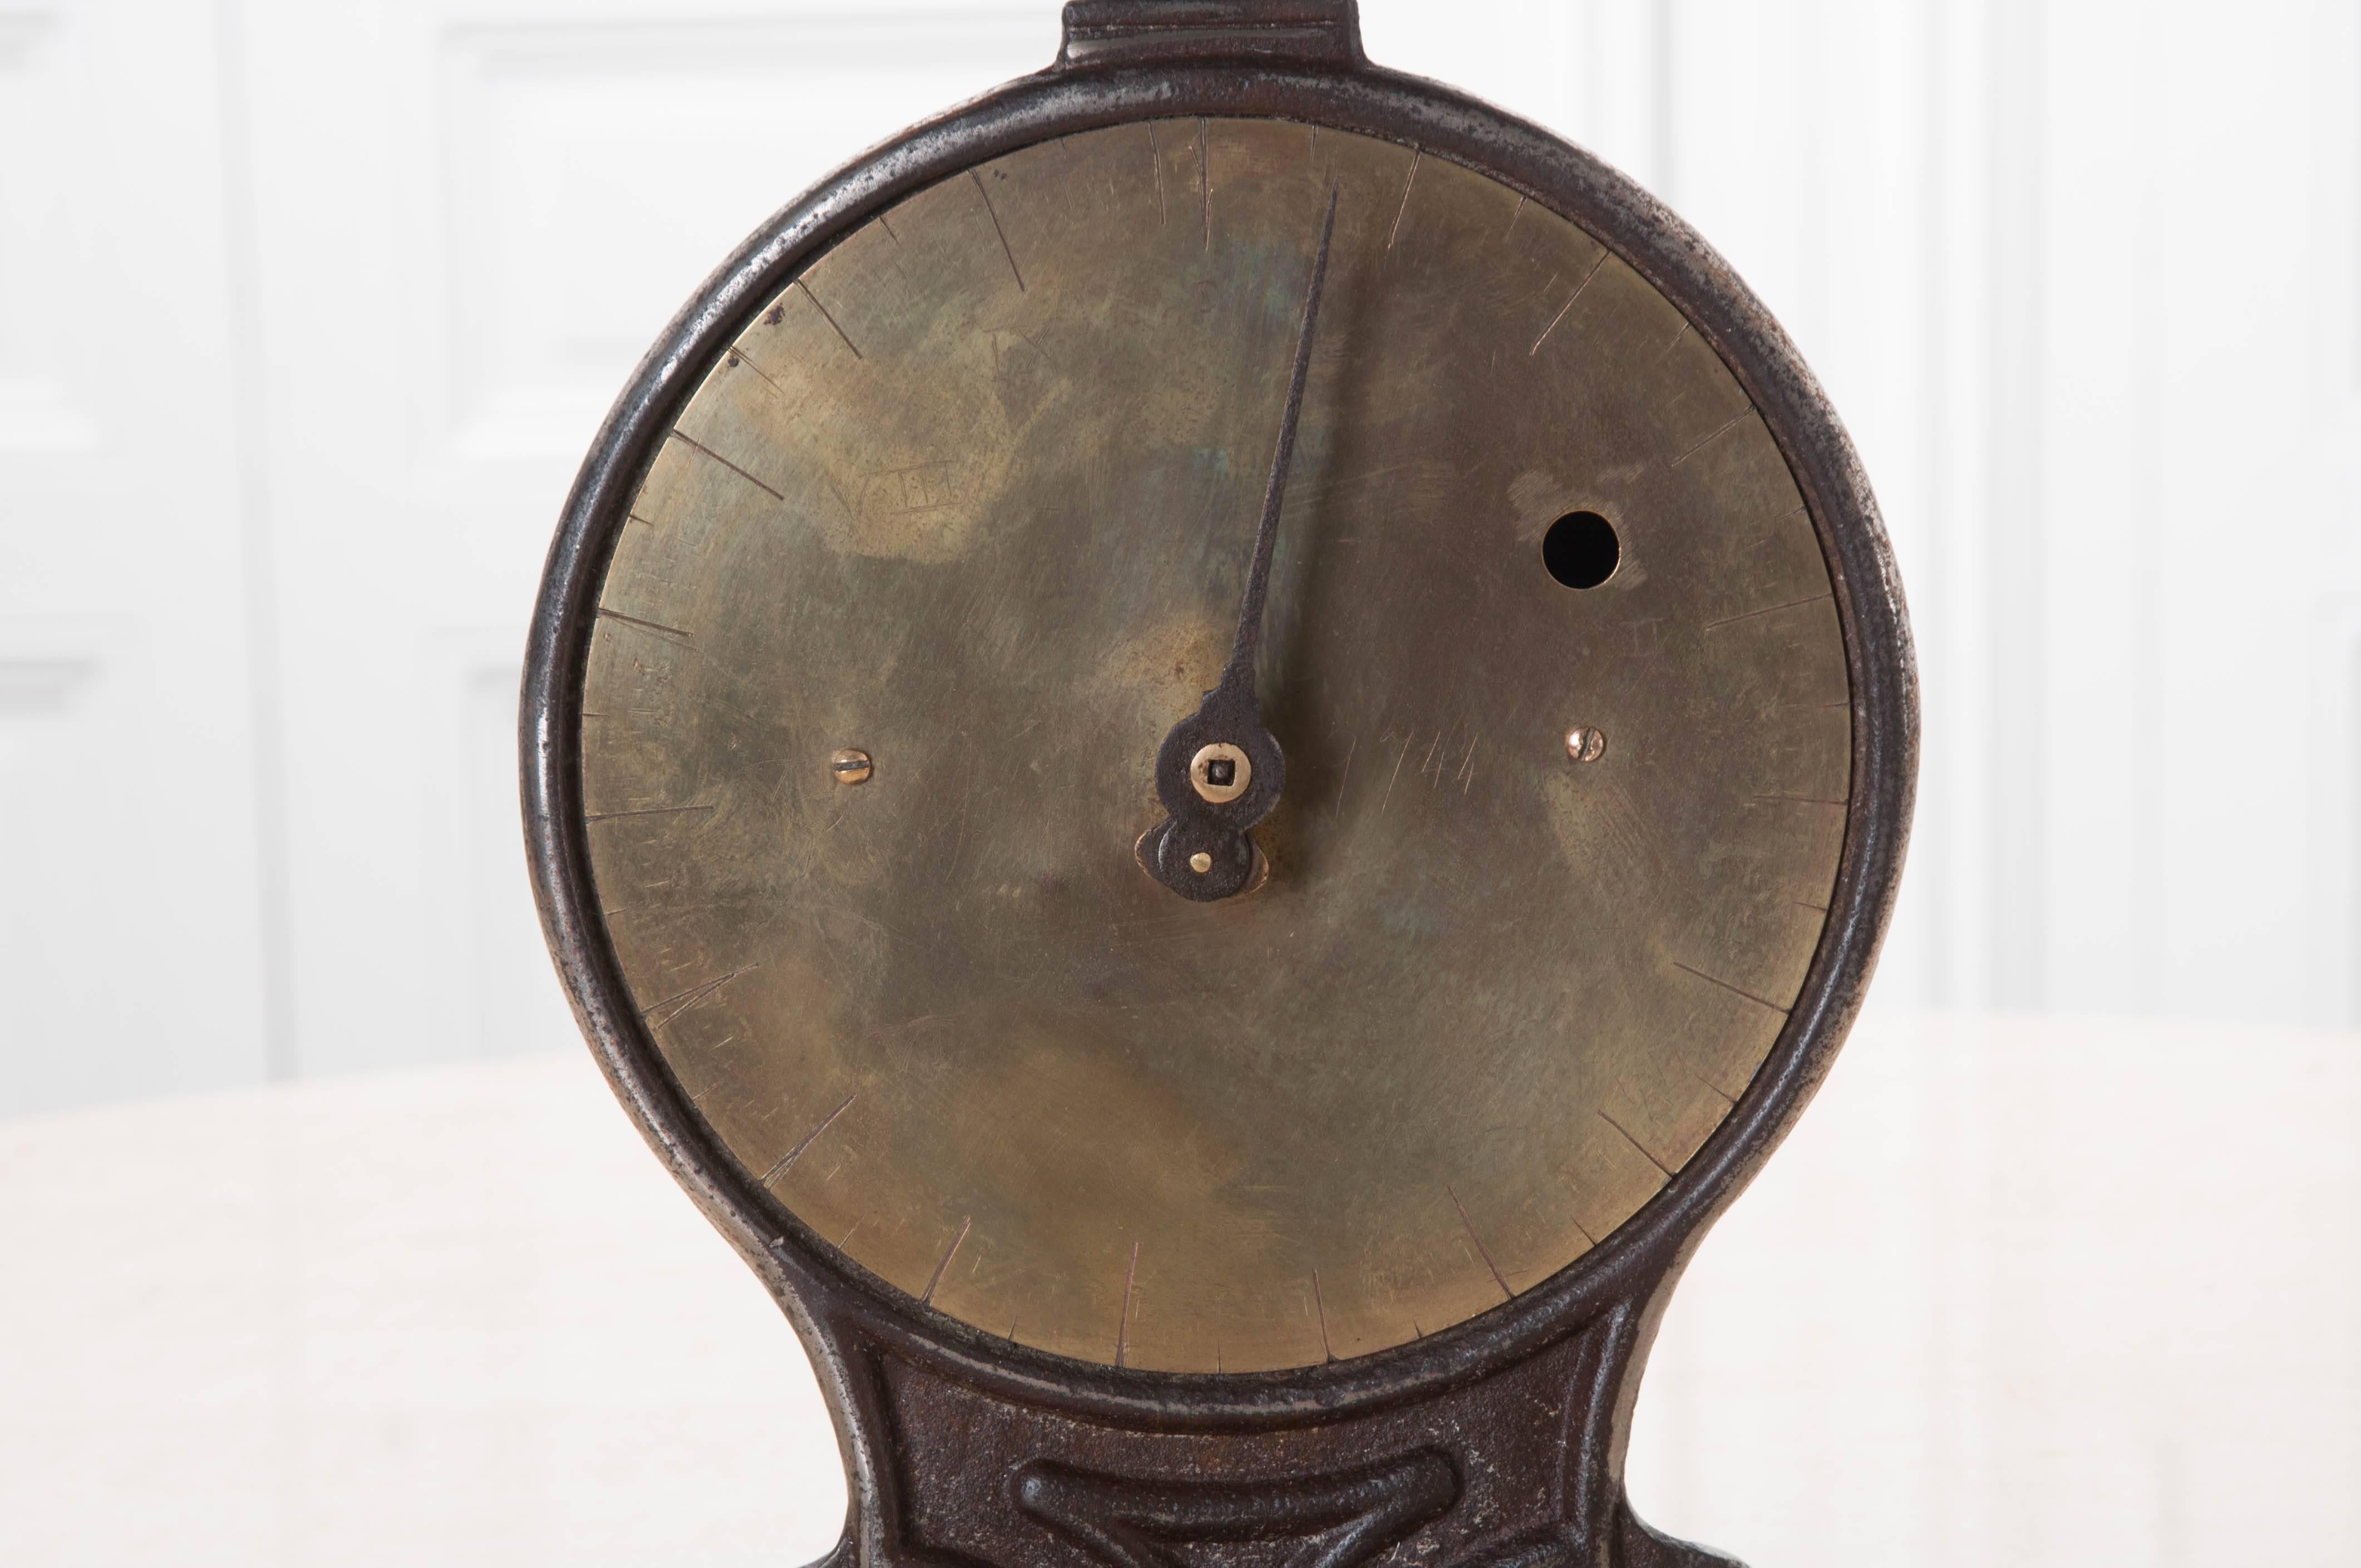 An English scale from the 1890s. This scale has a large, round, brass face with its dial in the centre. The cast iron base is heavy, with stylized details adding to its allure. Simply add product to the hammered metal tray, and that's how easy it is